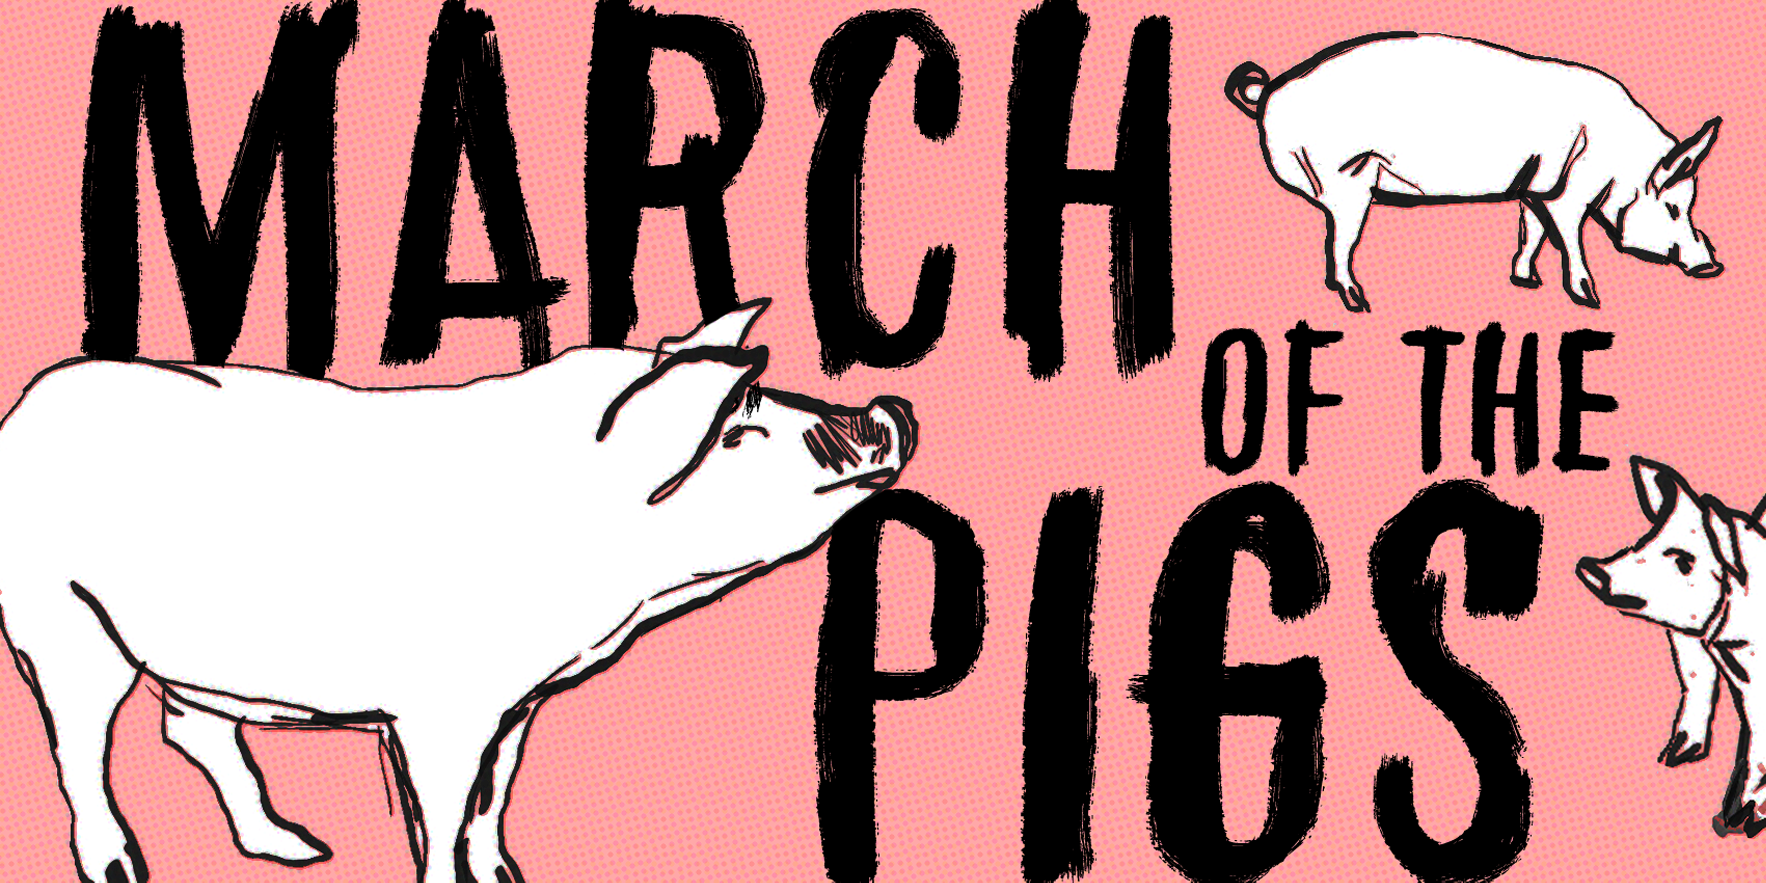 March Of The Pigs